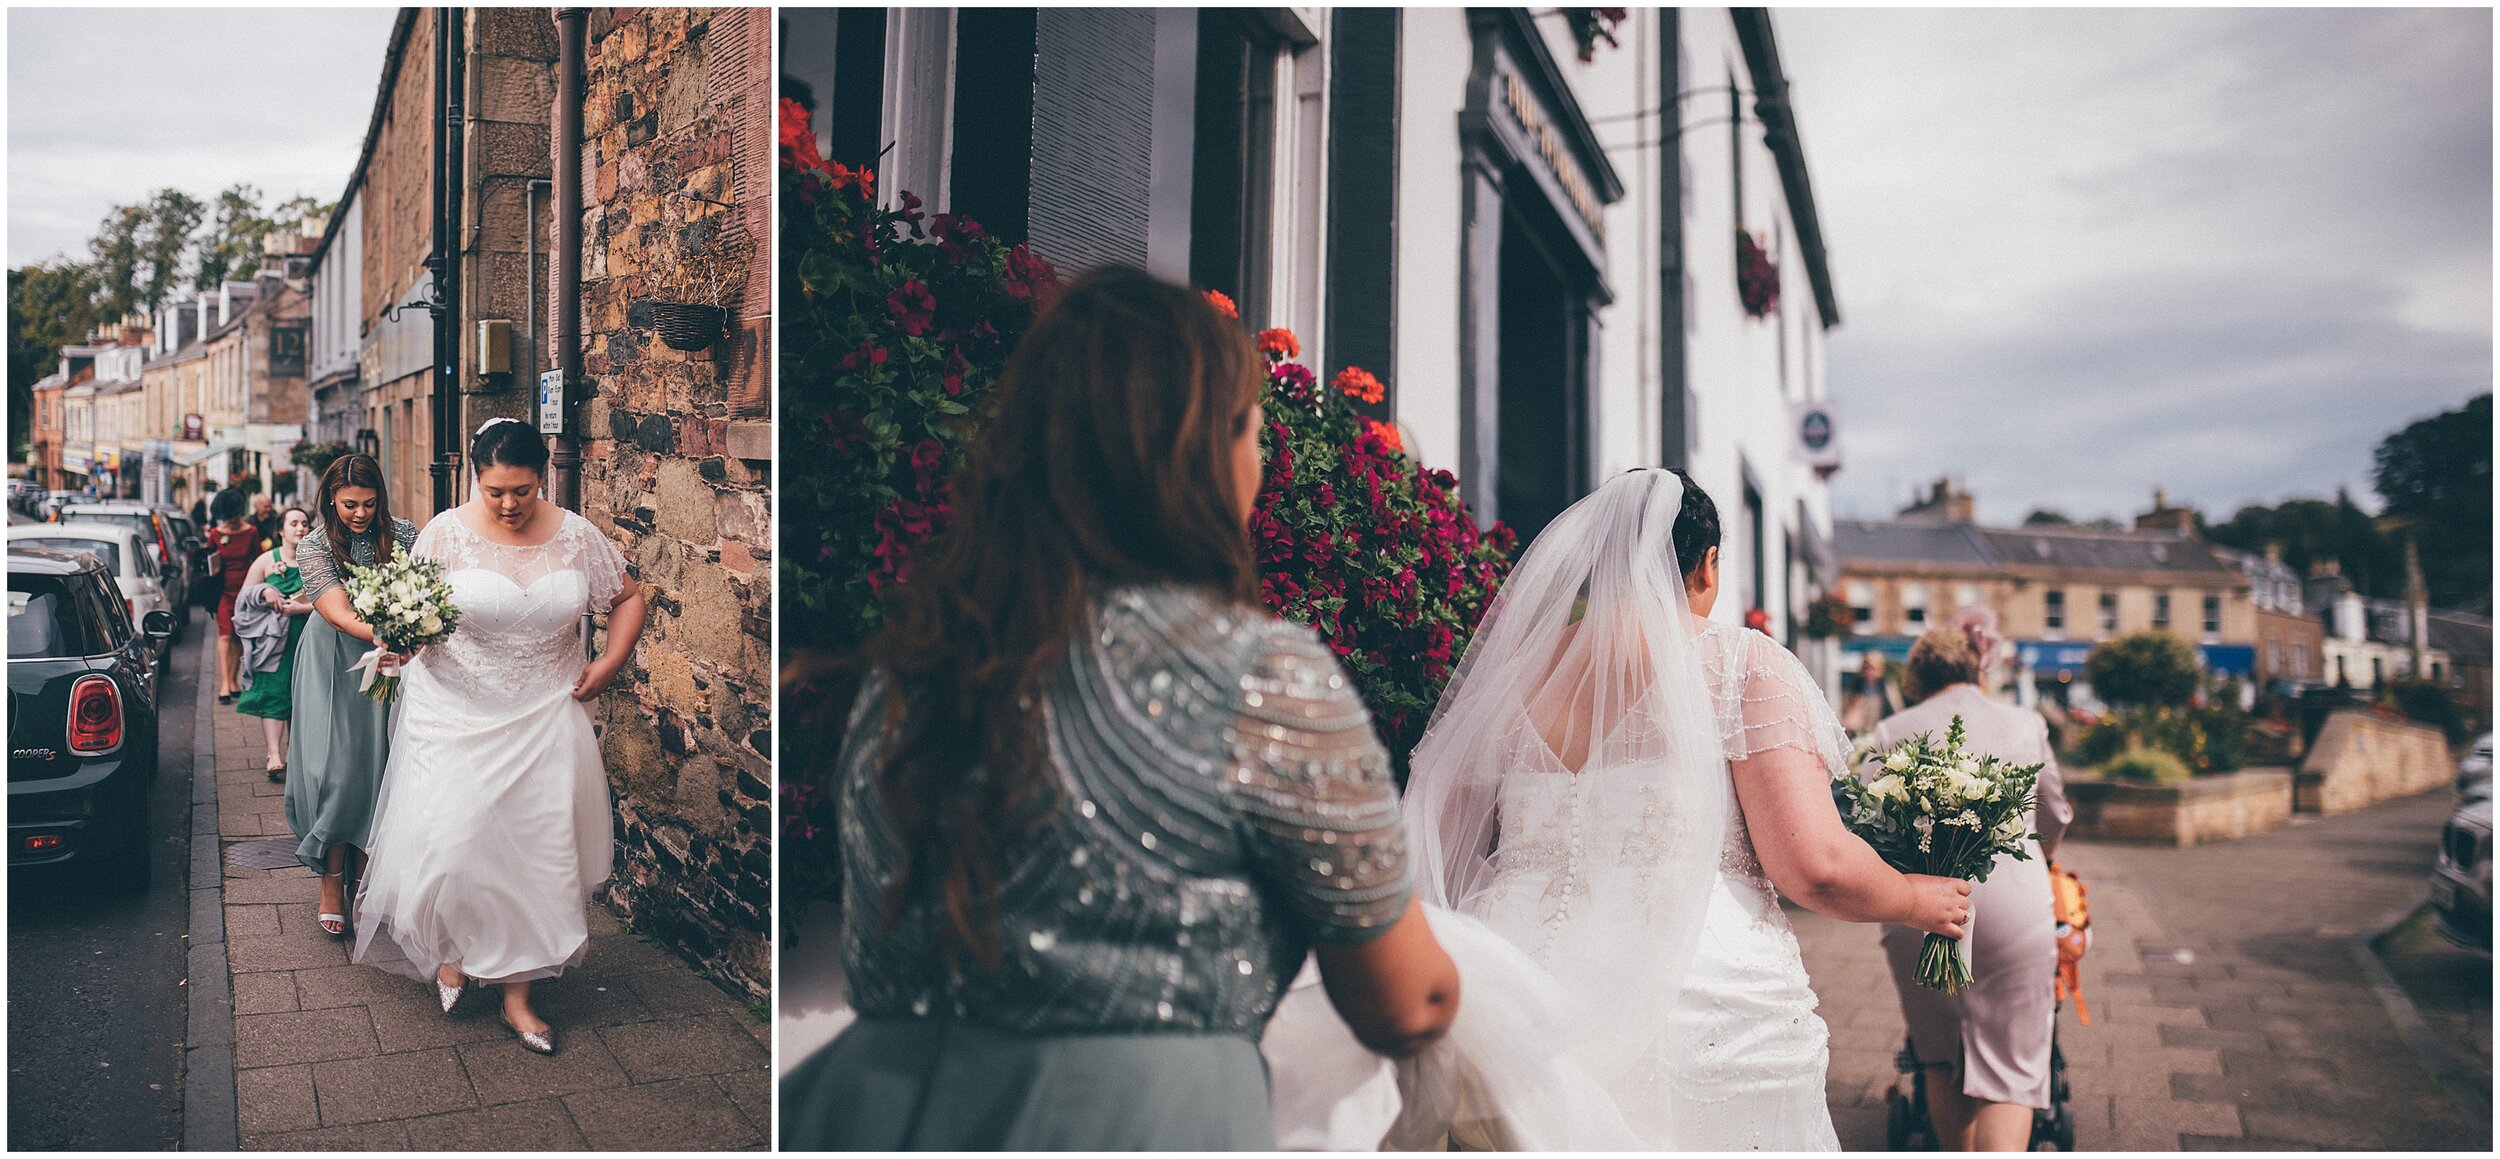 Bride walks through the town of Melrose on the way to her wedding.